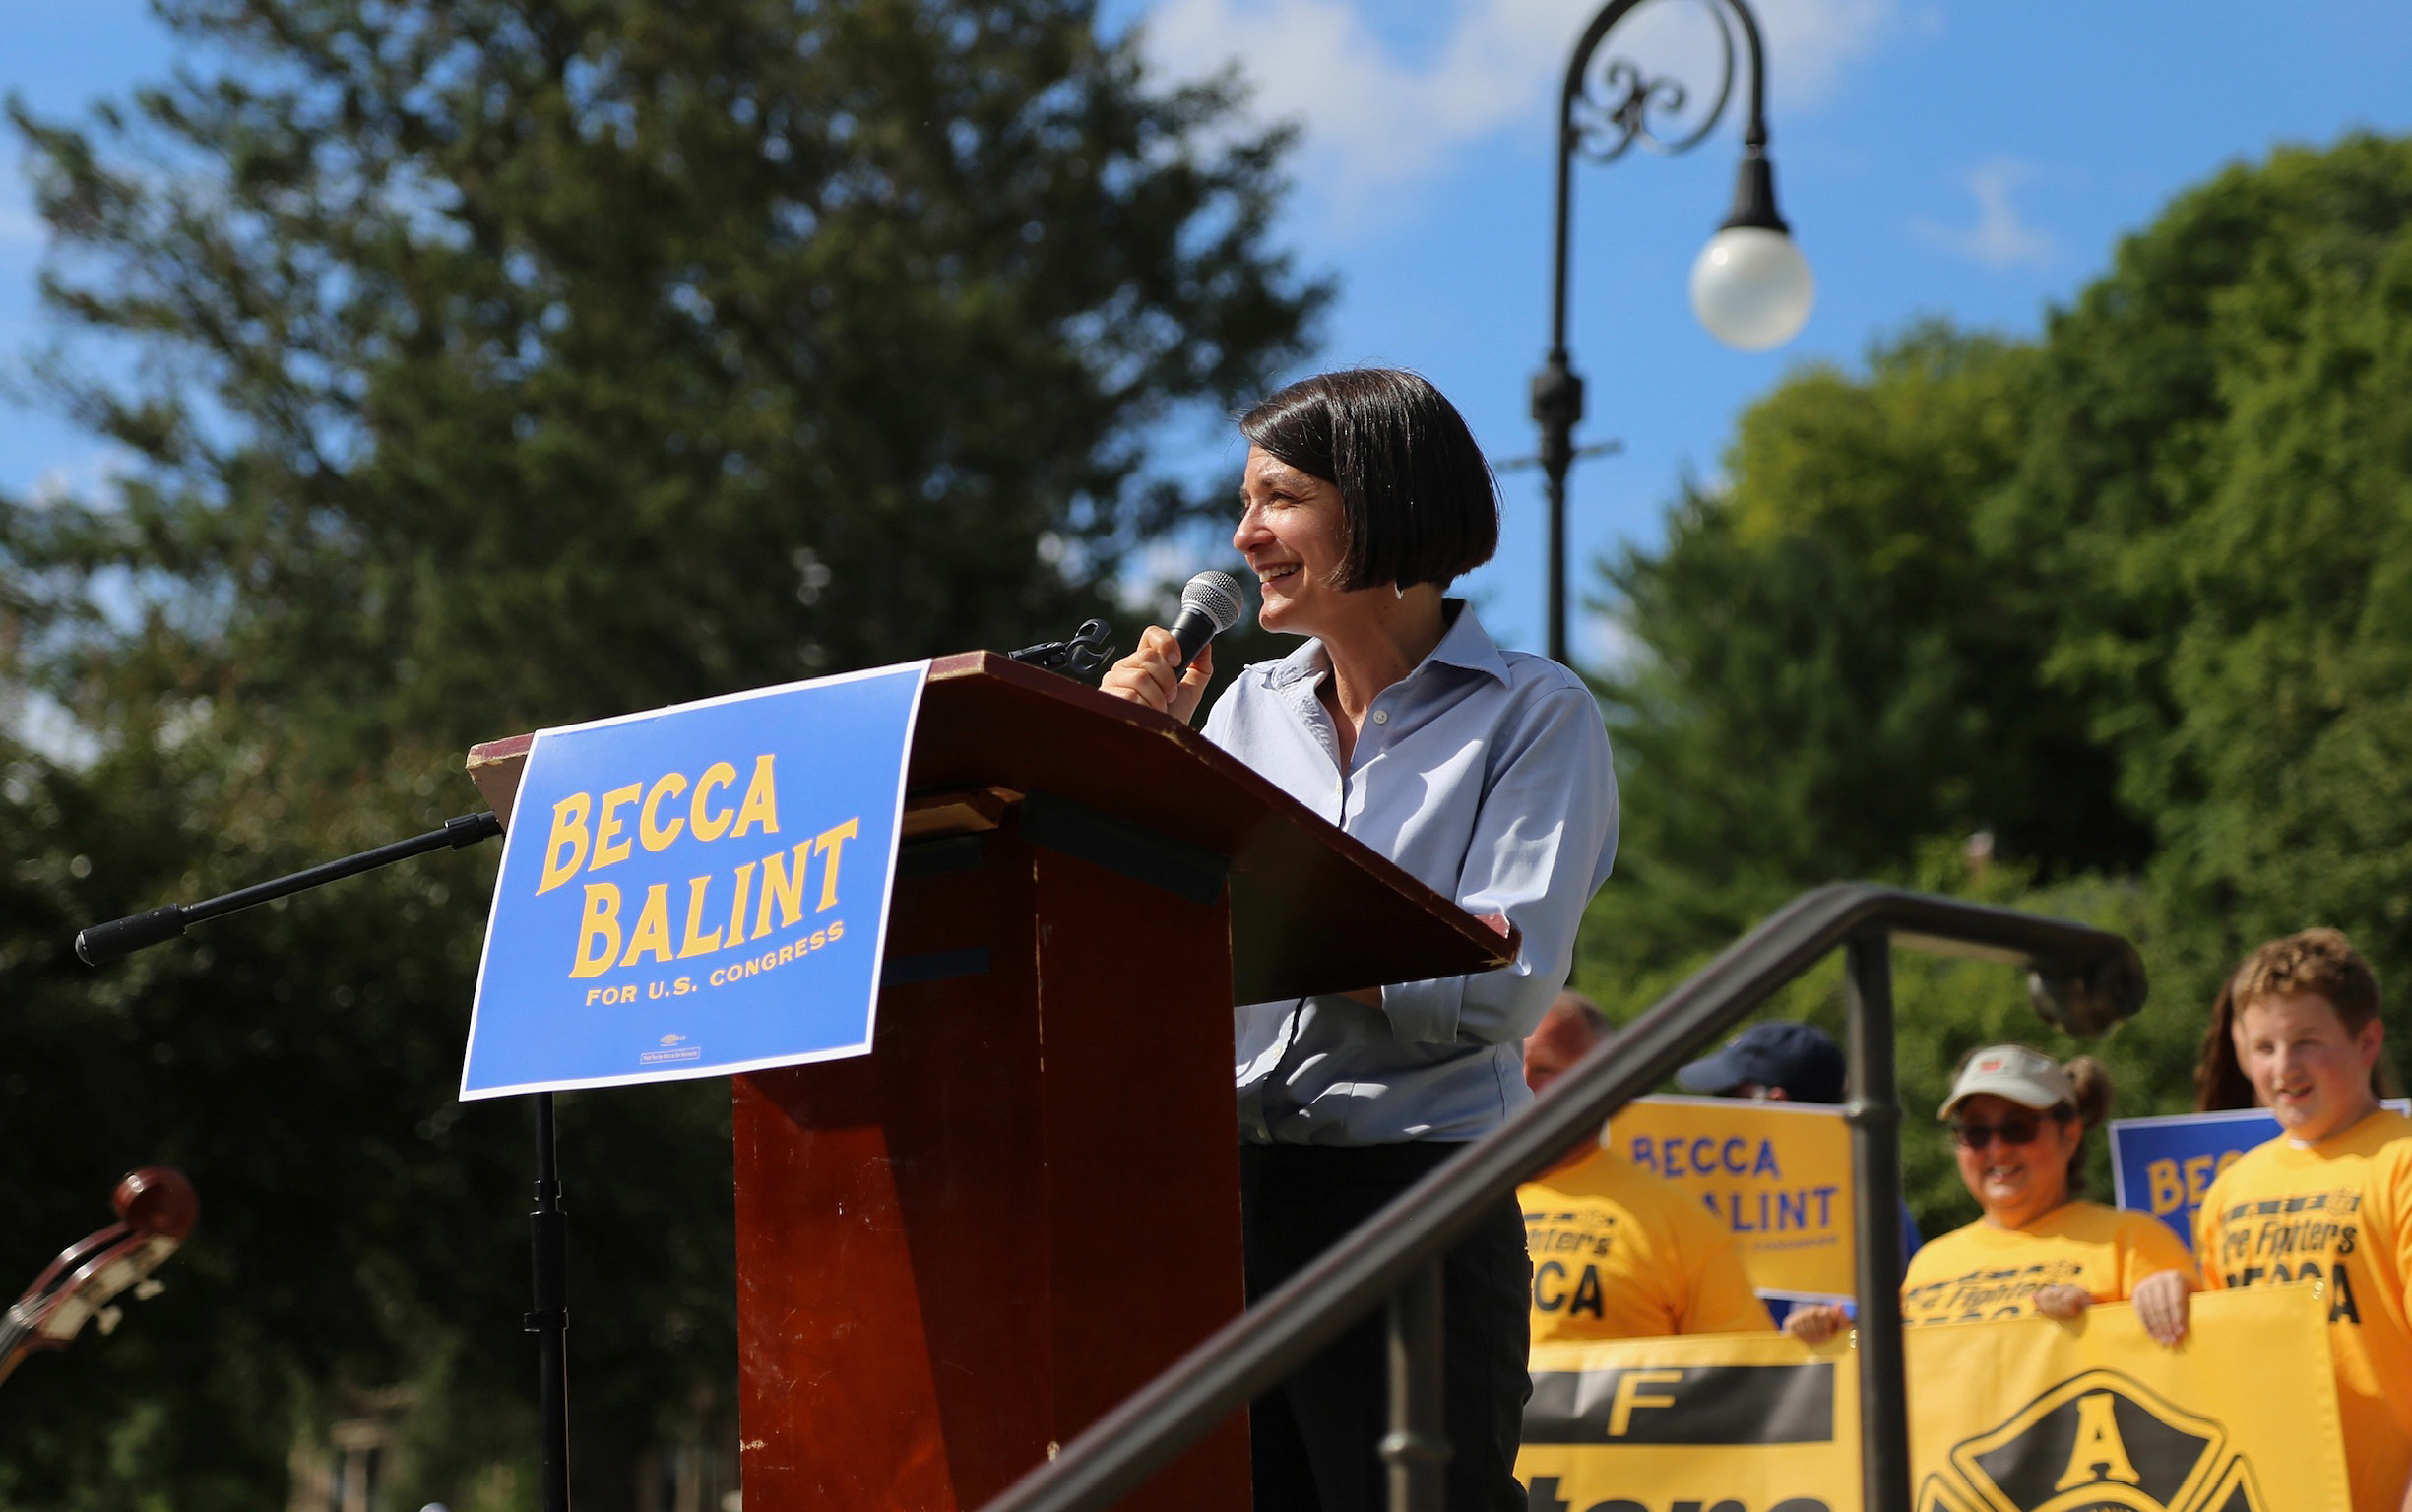 PHOTO: Becca Balint is running for Congress from Vermont